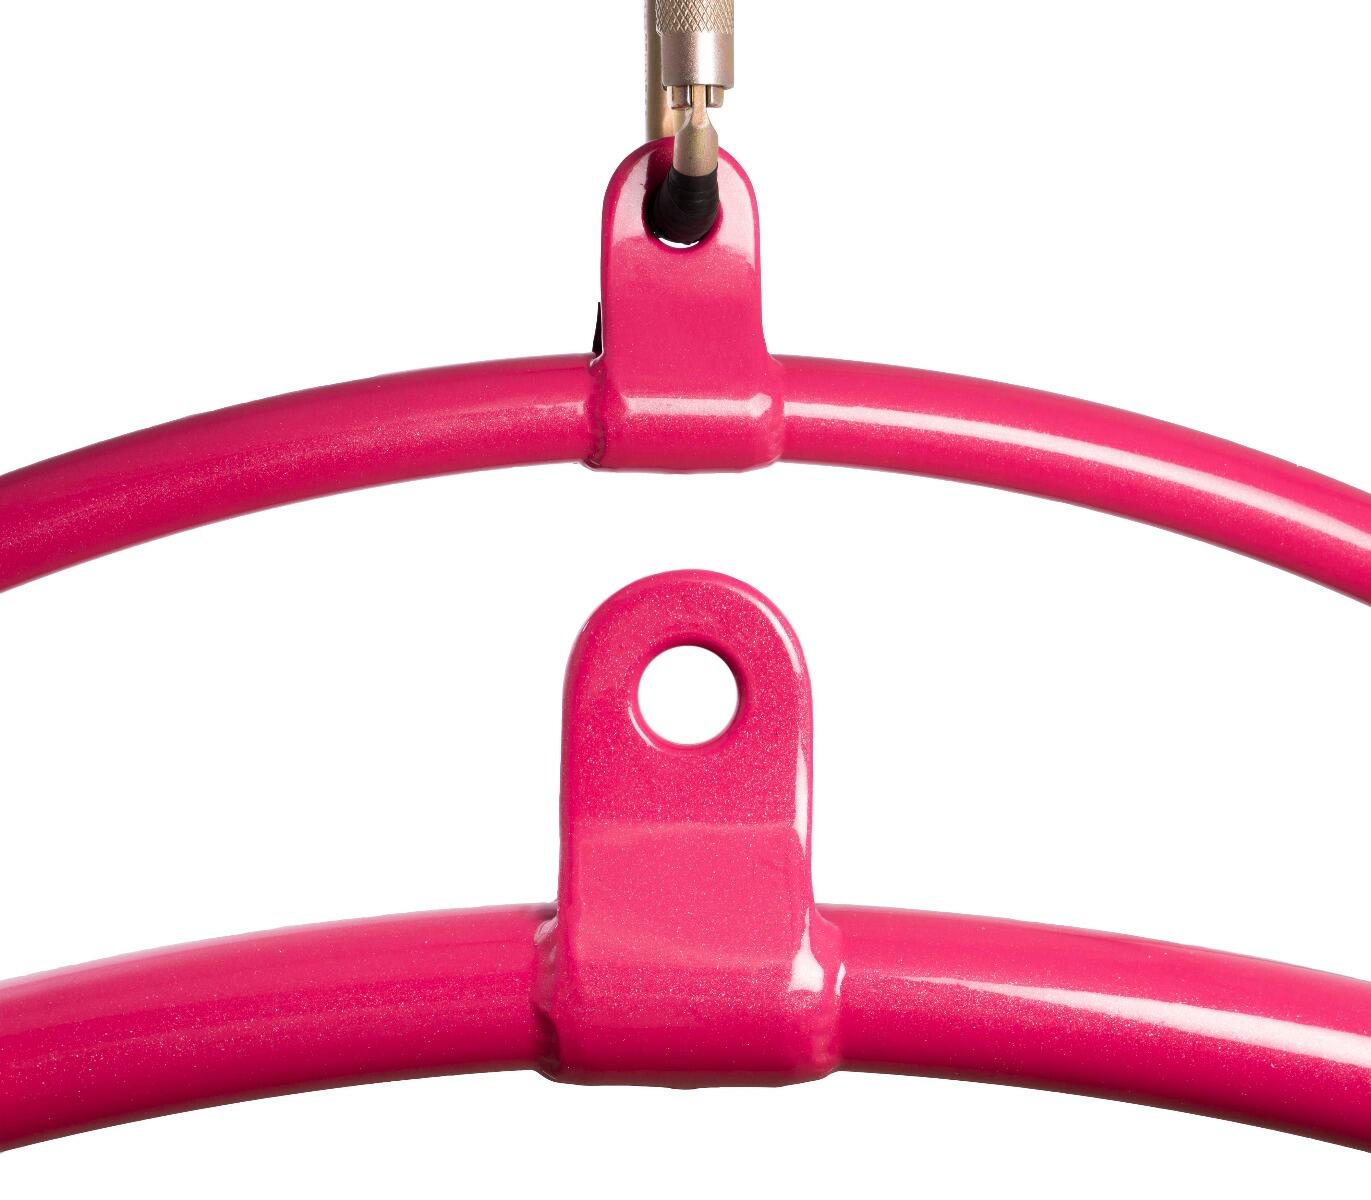 Firetoys 1 Point Aerial Hoop - Pink Sparkle 2/5